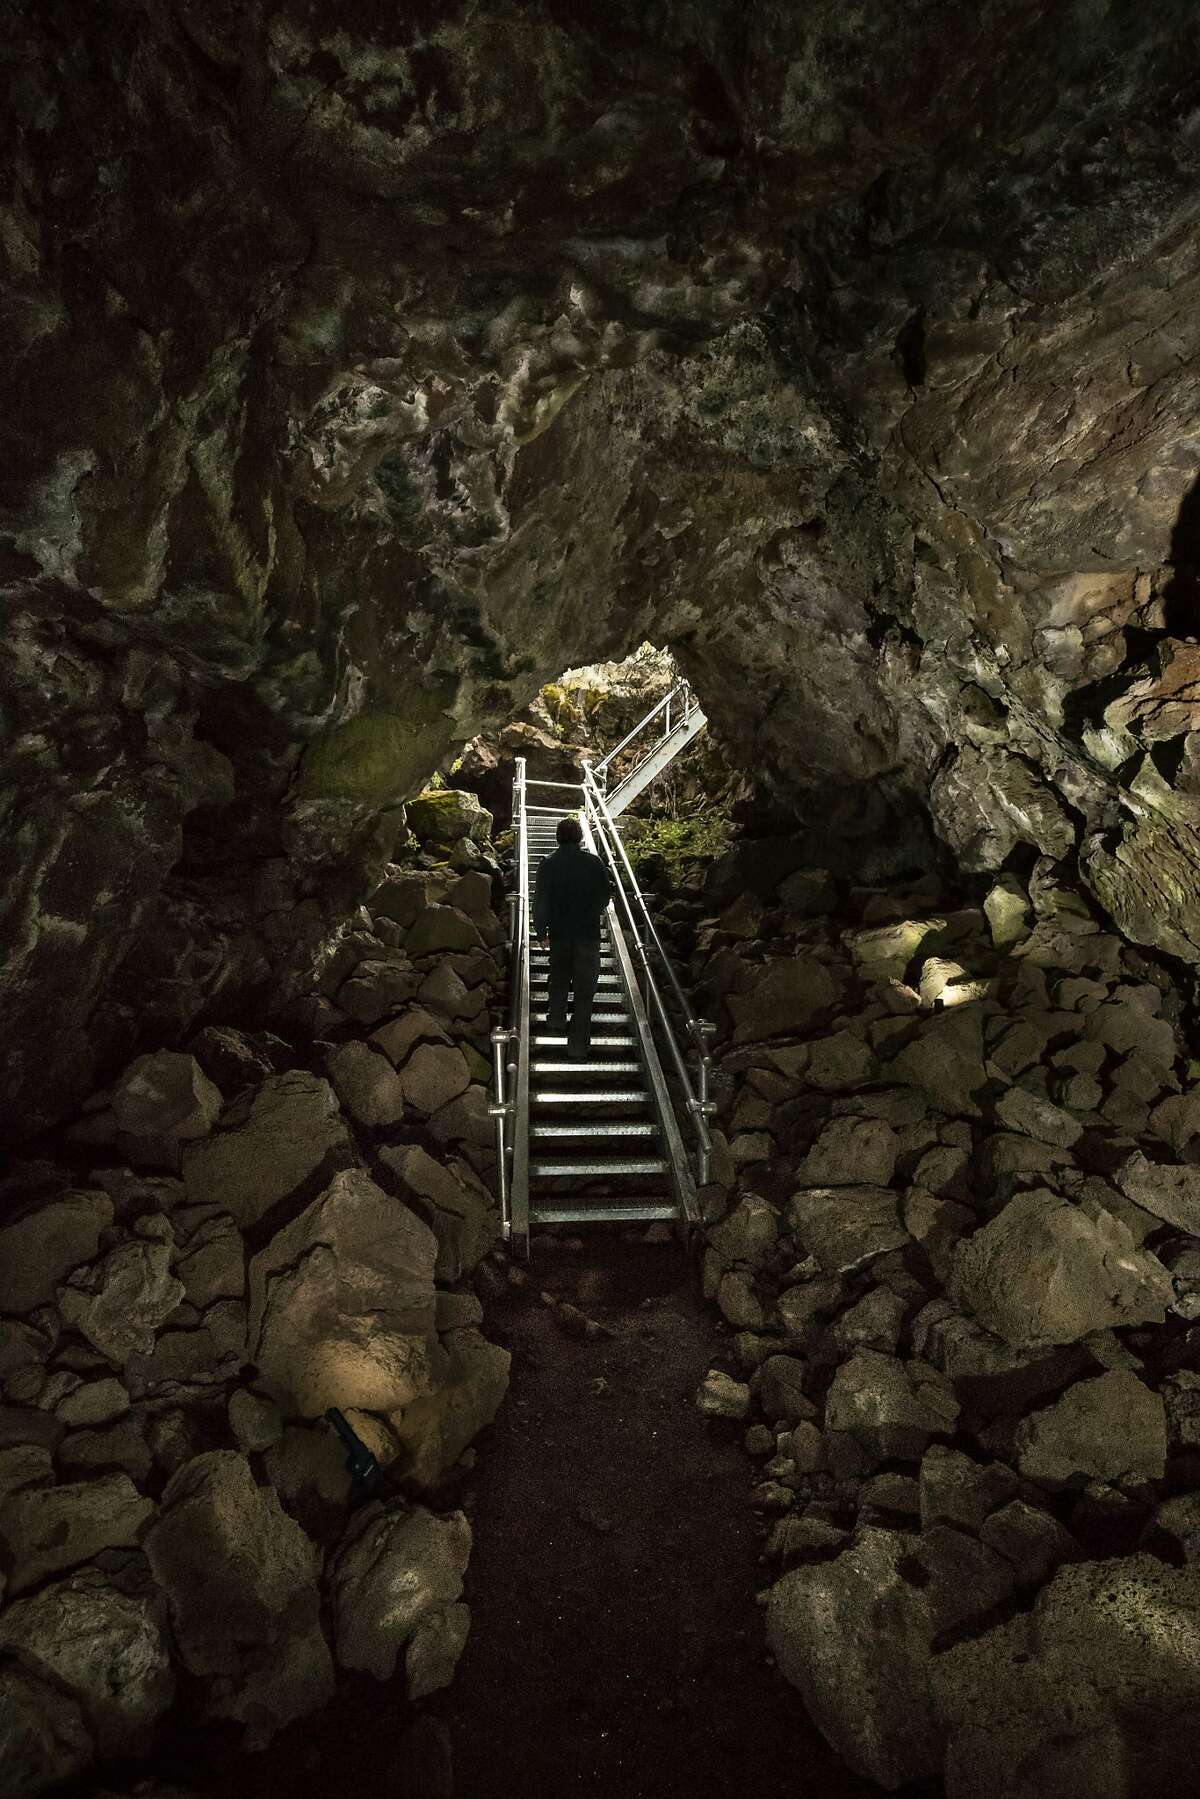 Metal stairs provide access to the Merrill cave in the Lava Beds National Monument on Wednesday, May 31 2017 in Siskiyou County, CA.